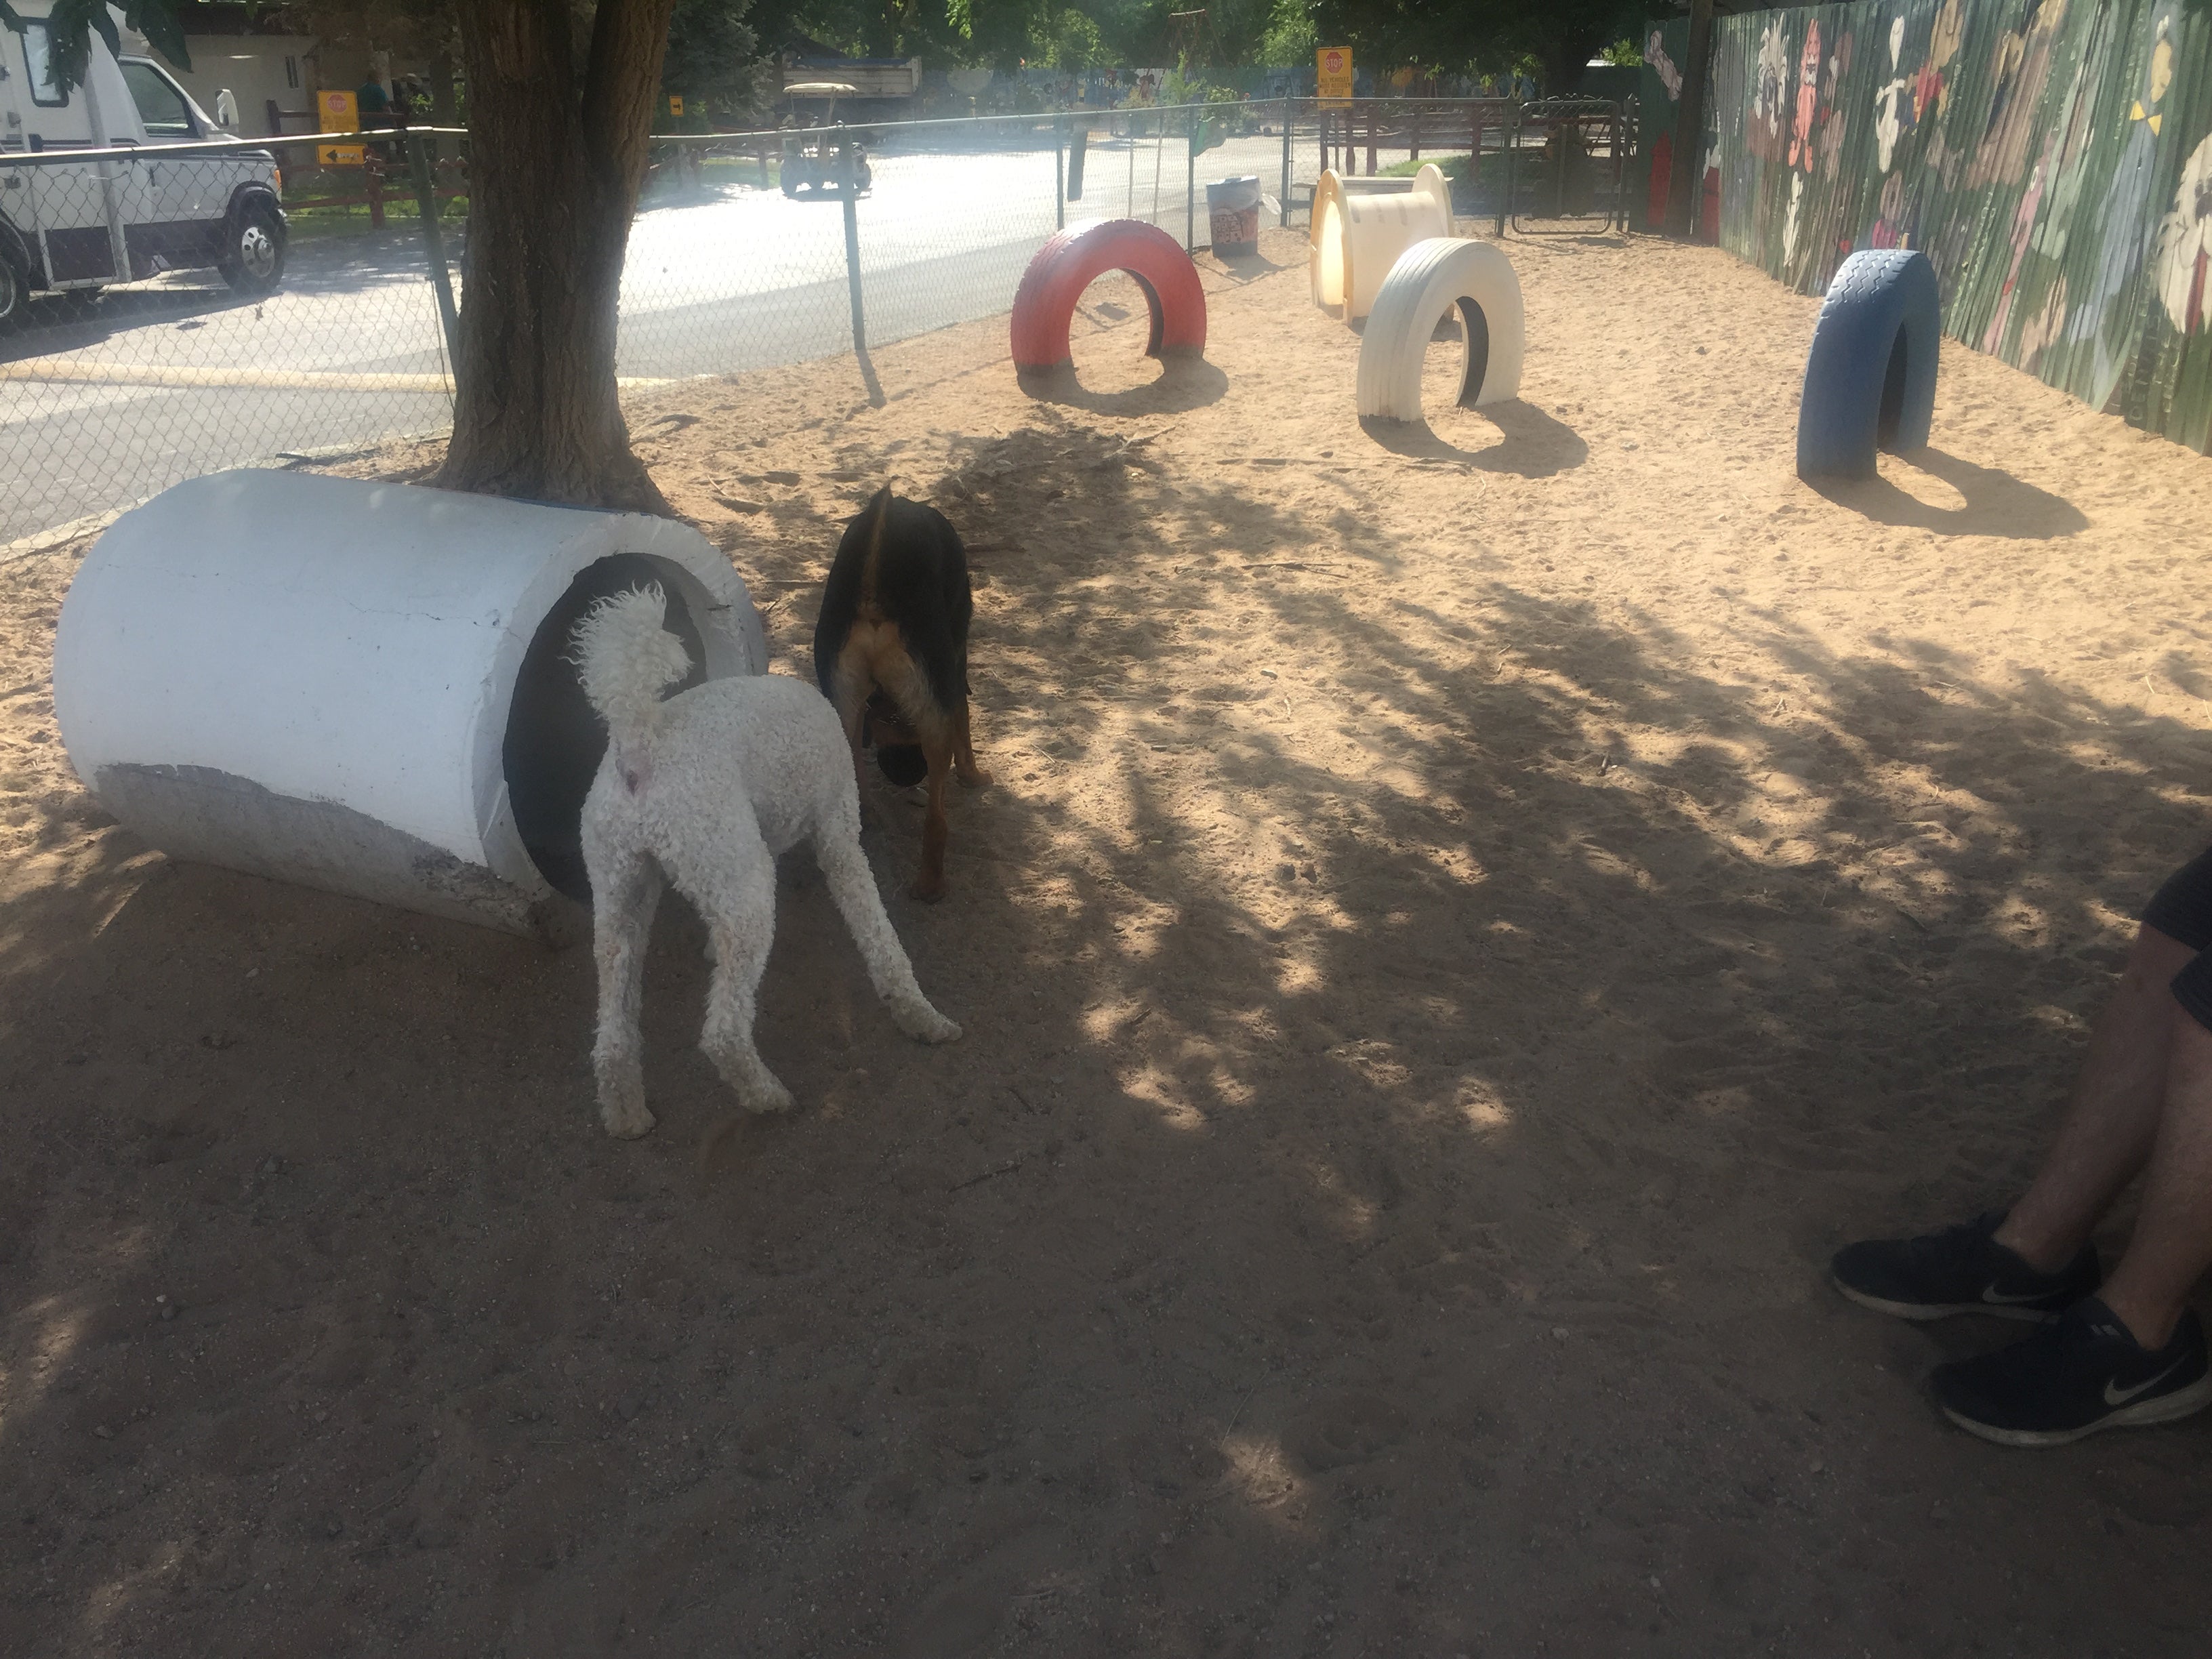 One of the dog parks available